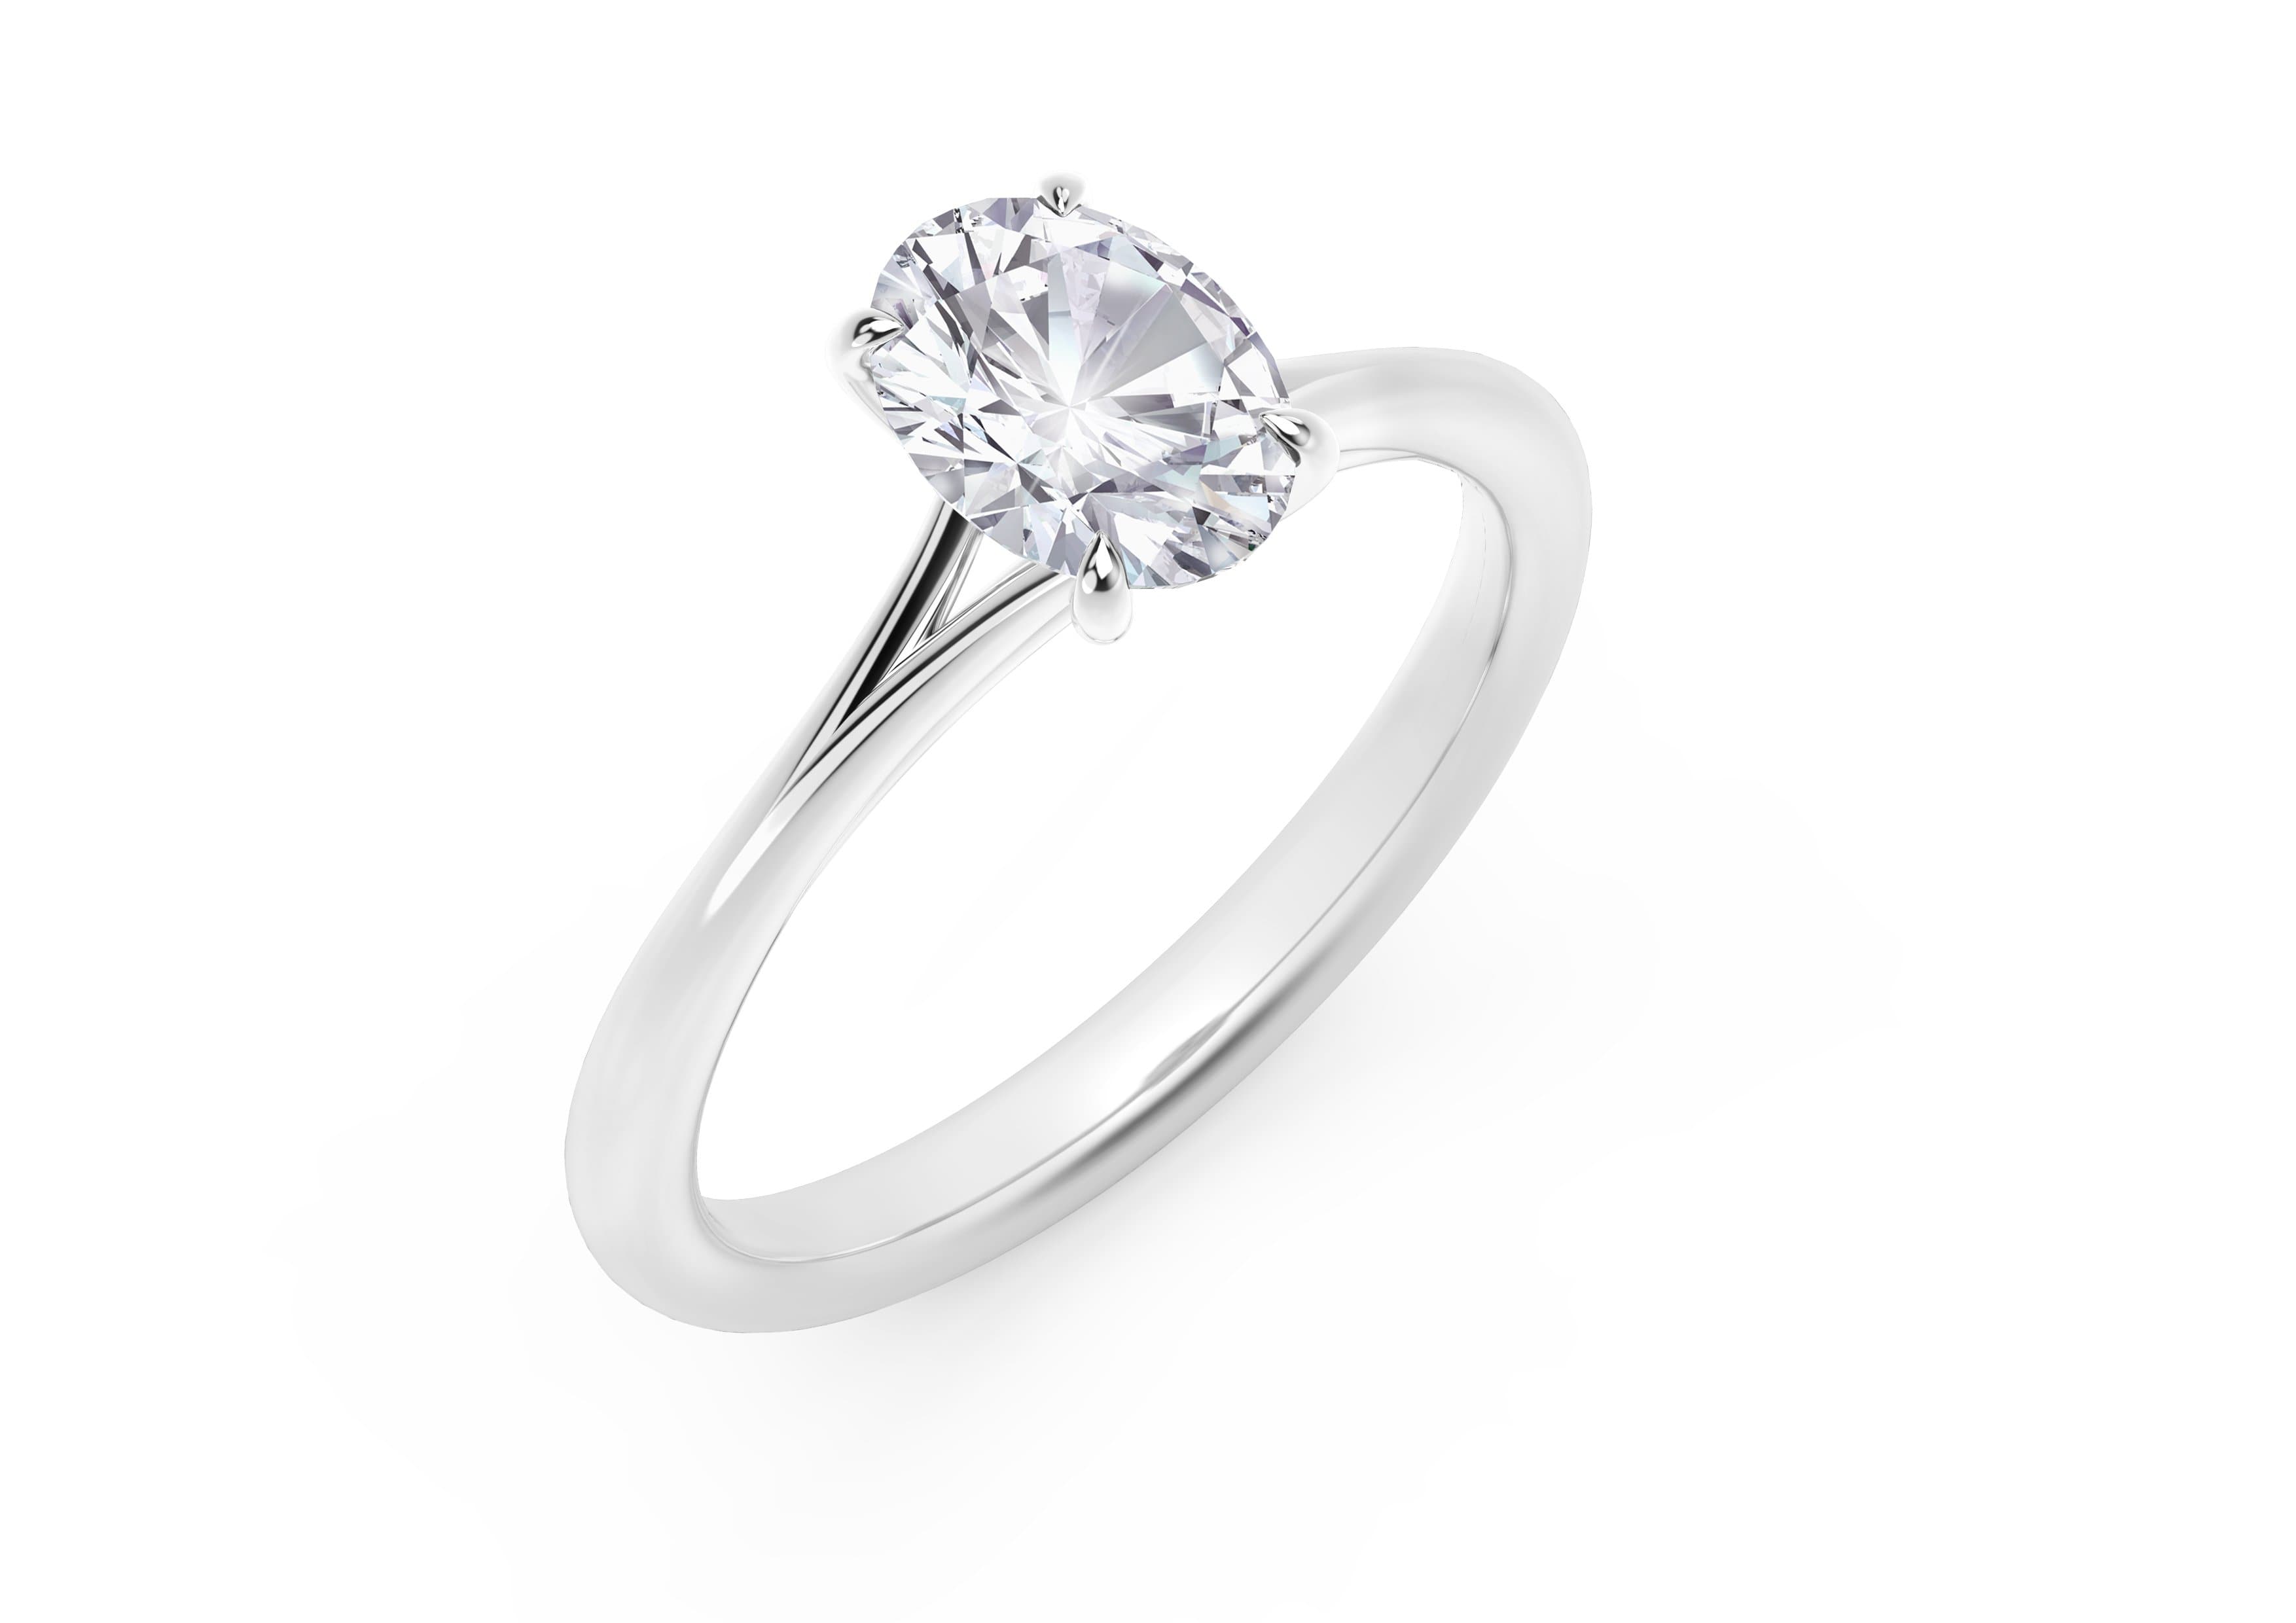 Diamond Jewelry Collections | Exquisite Designs | Forevermark